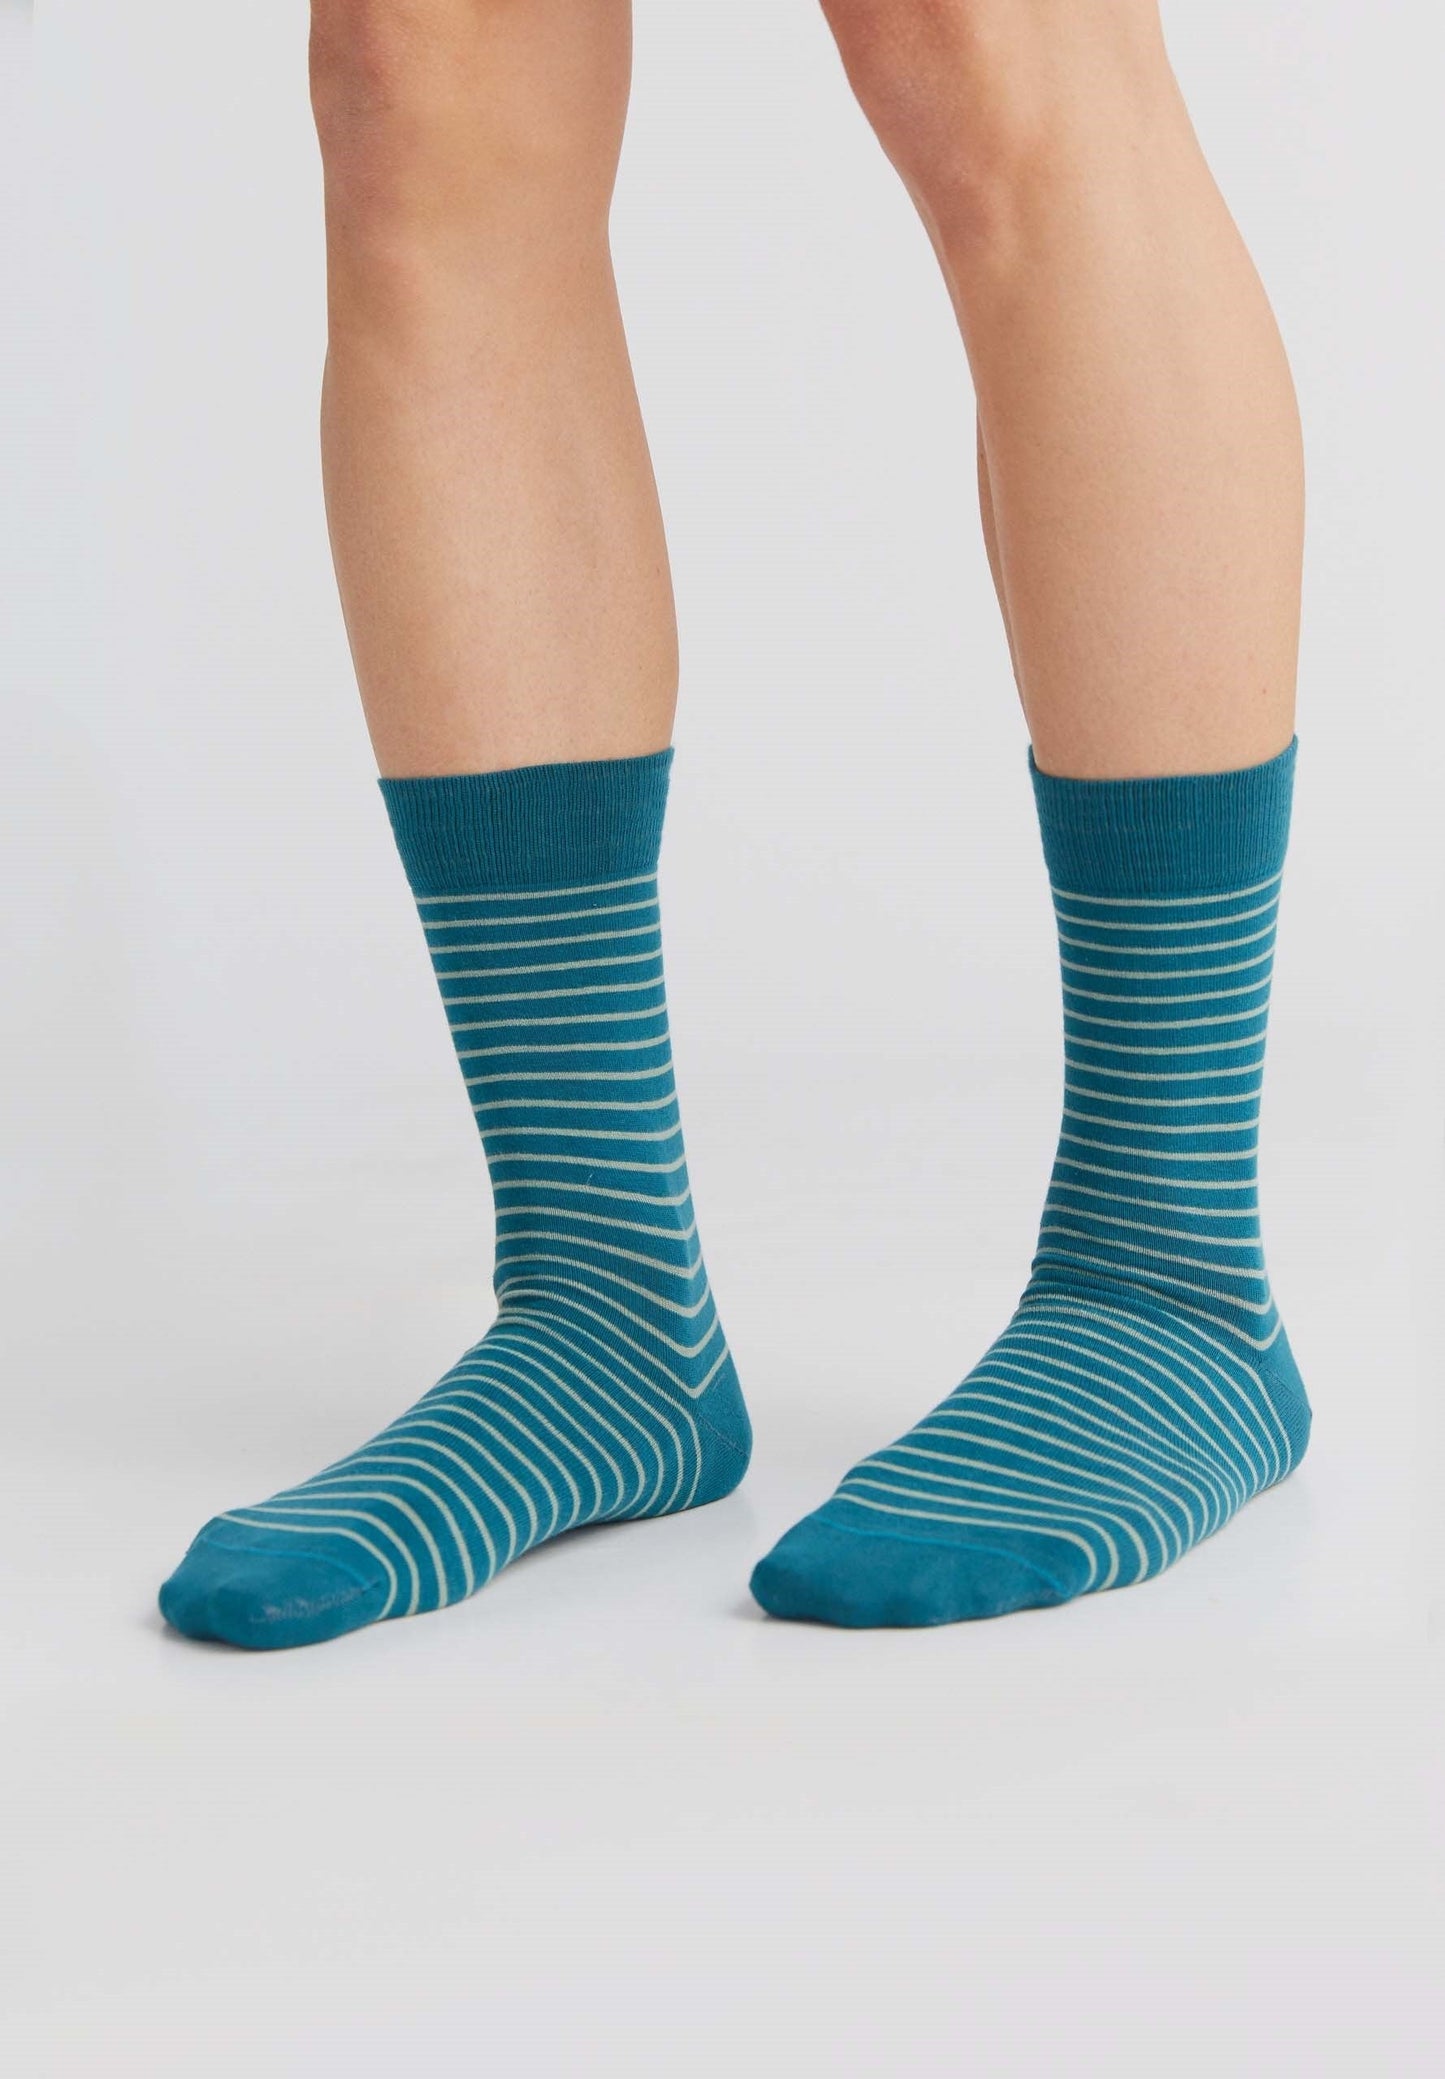 2310 | Stockings teal/frost green